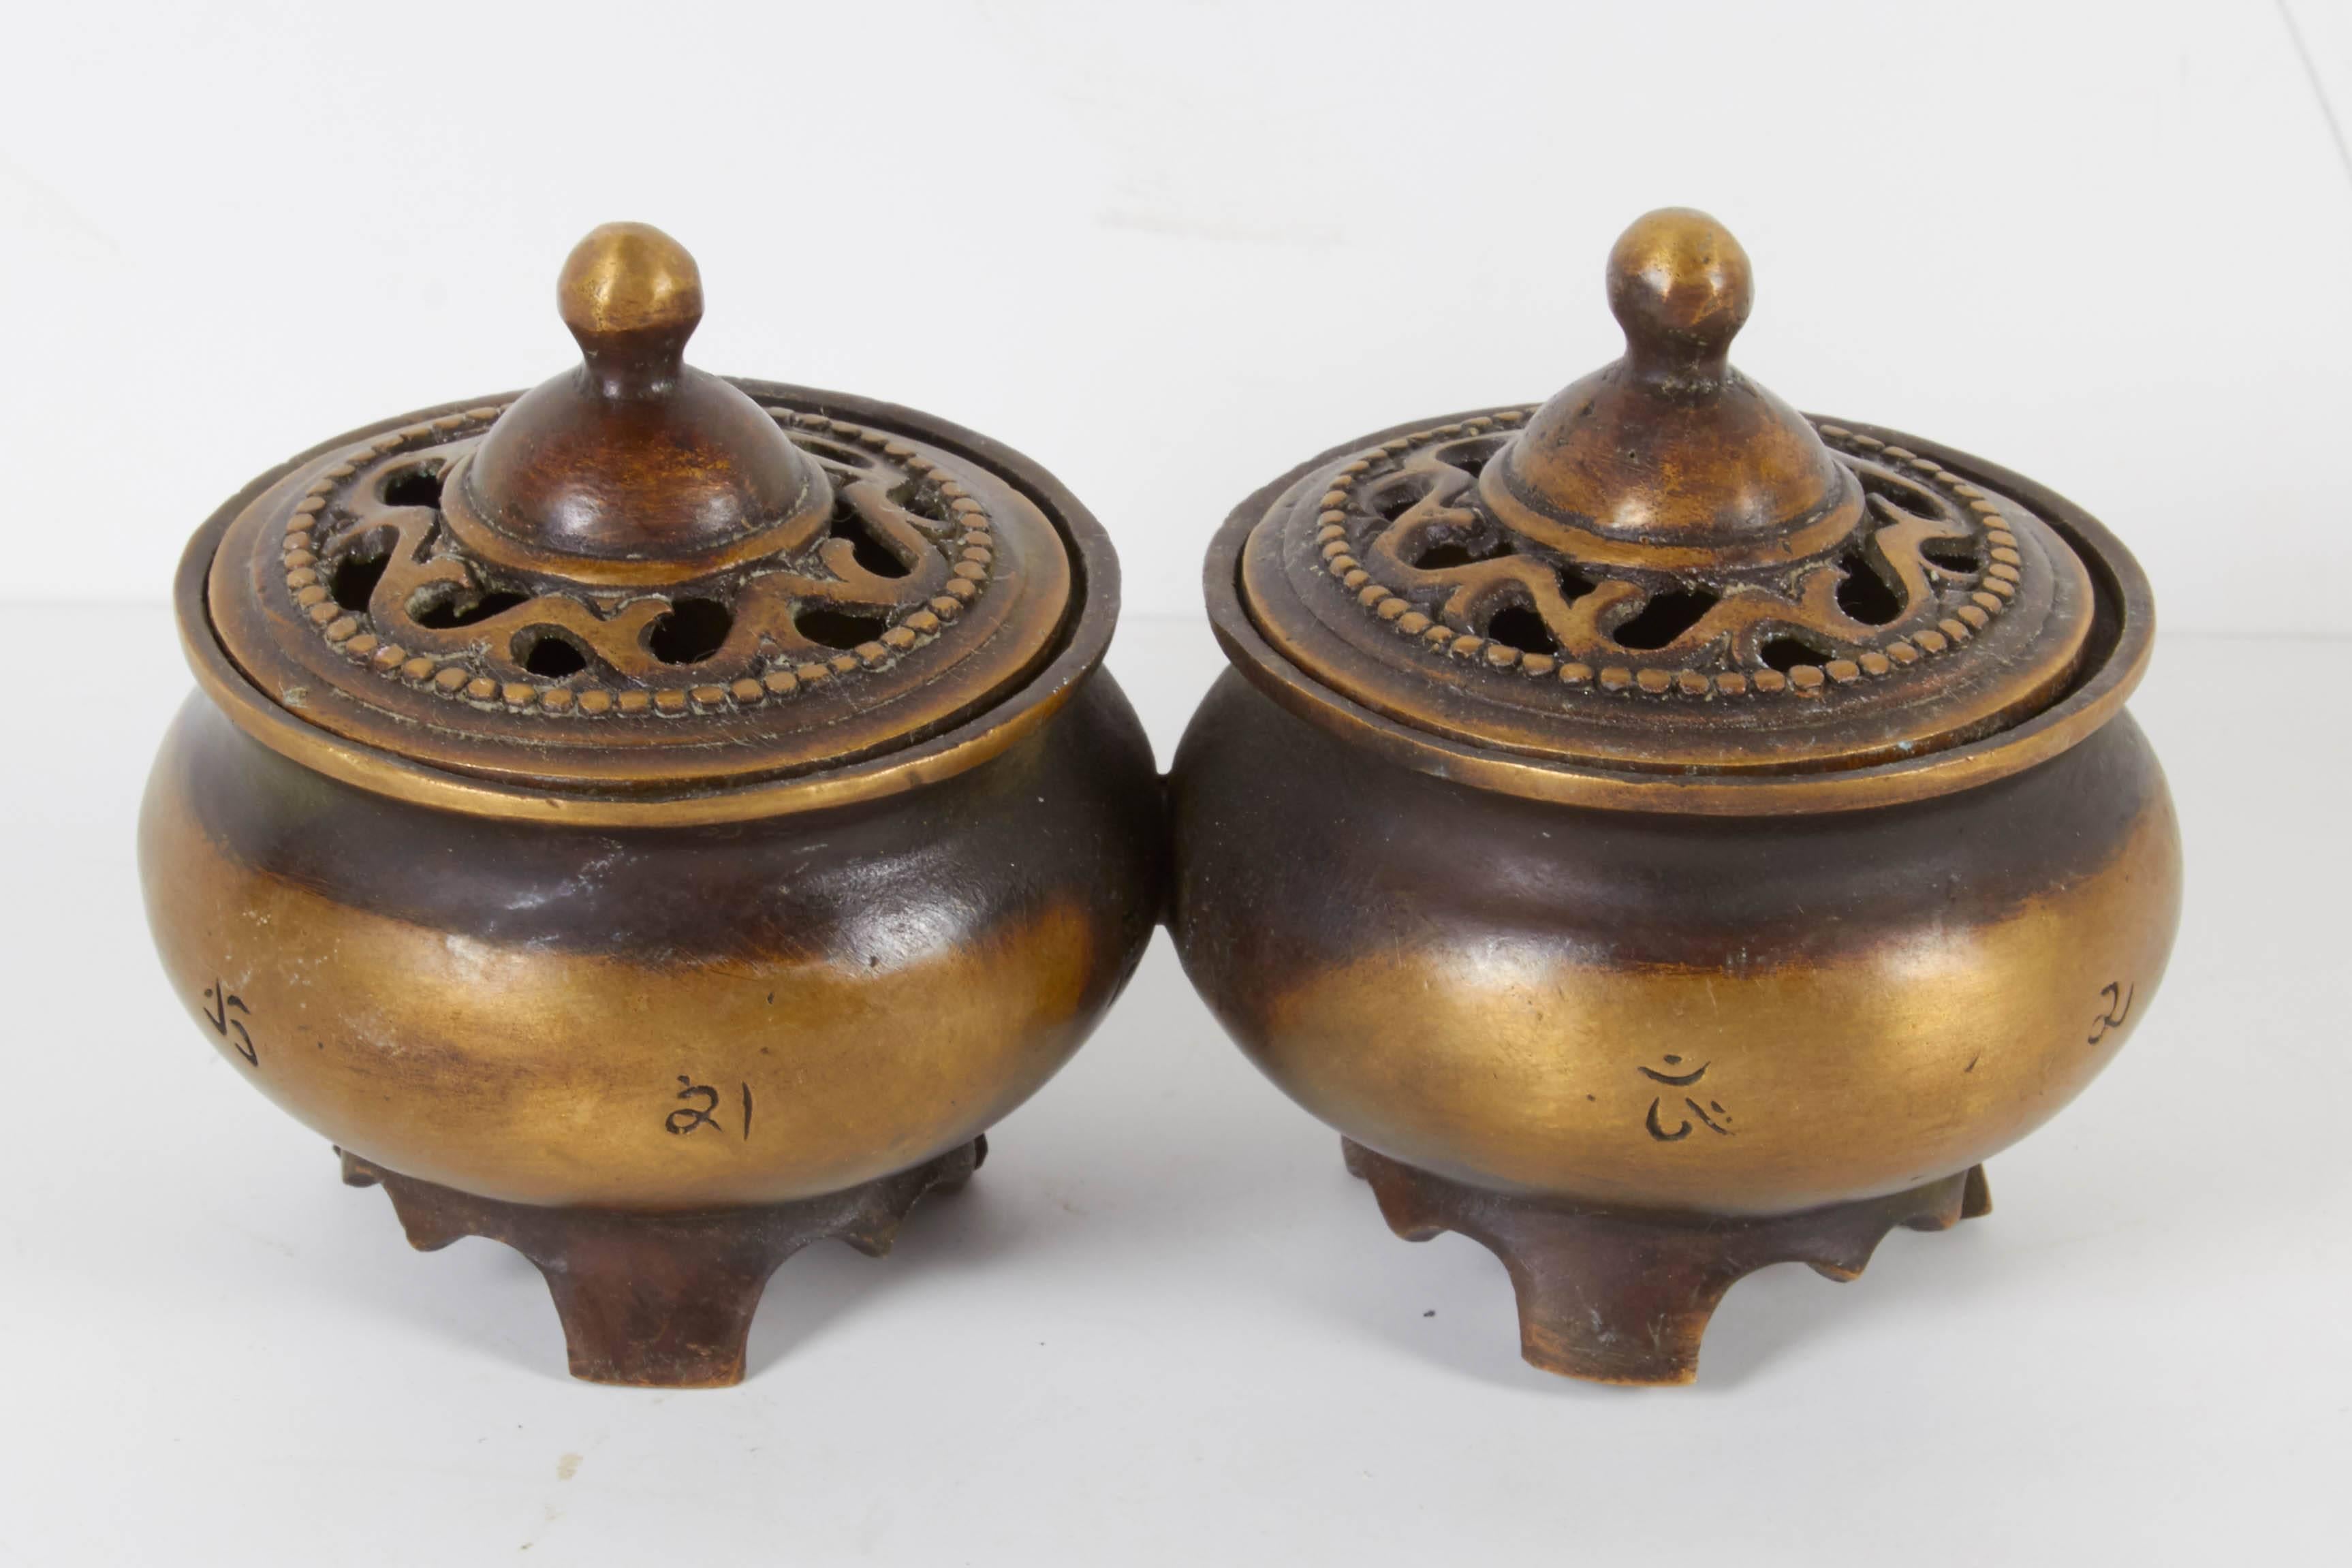 A connected pair of carefully crafted and nicely shaped Tibetan incense burners with decorative lids. These burners beautifully display their many years of handling and use. Very spiritual piece.
W456.